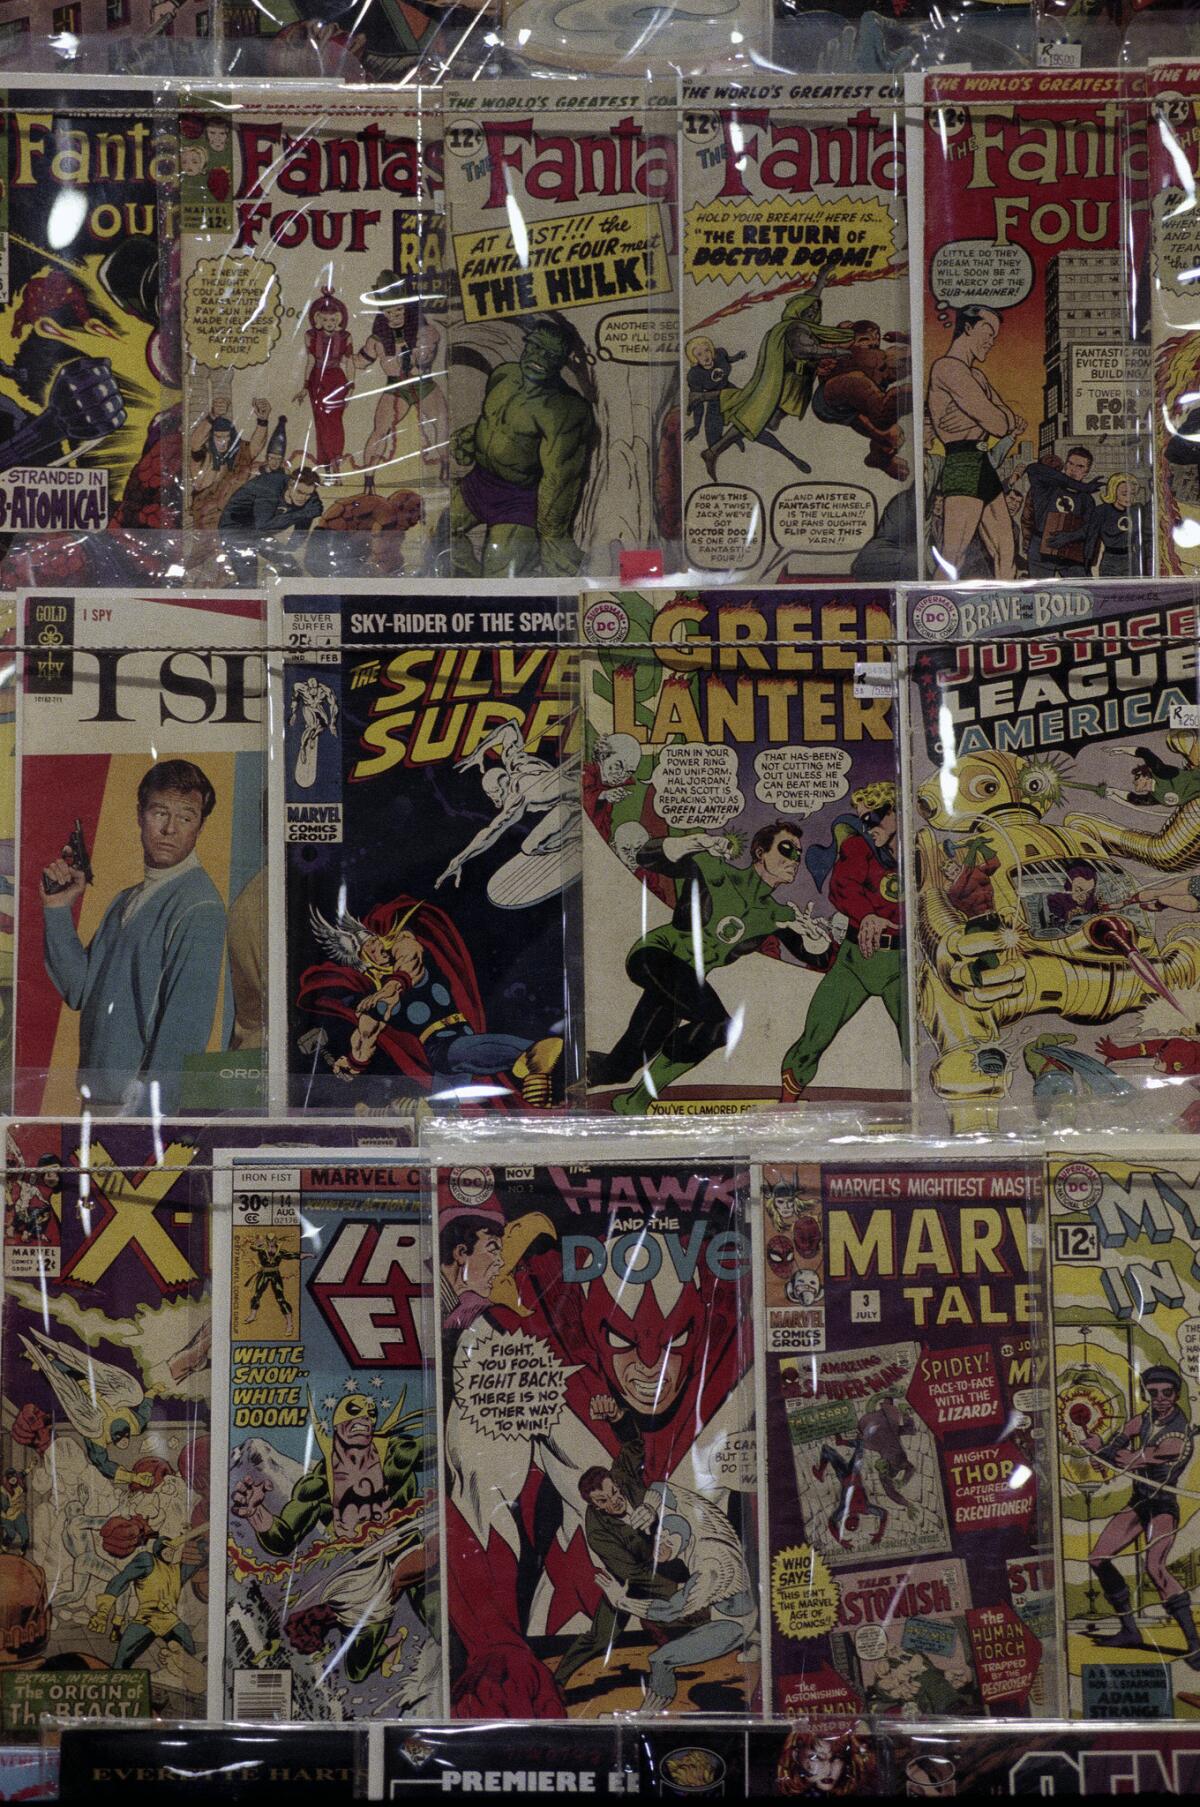 Old comic books are displayed at the San Diego Comic-Con in 1995.